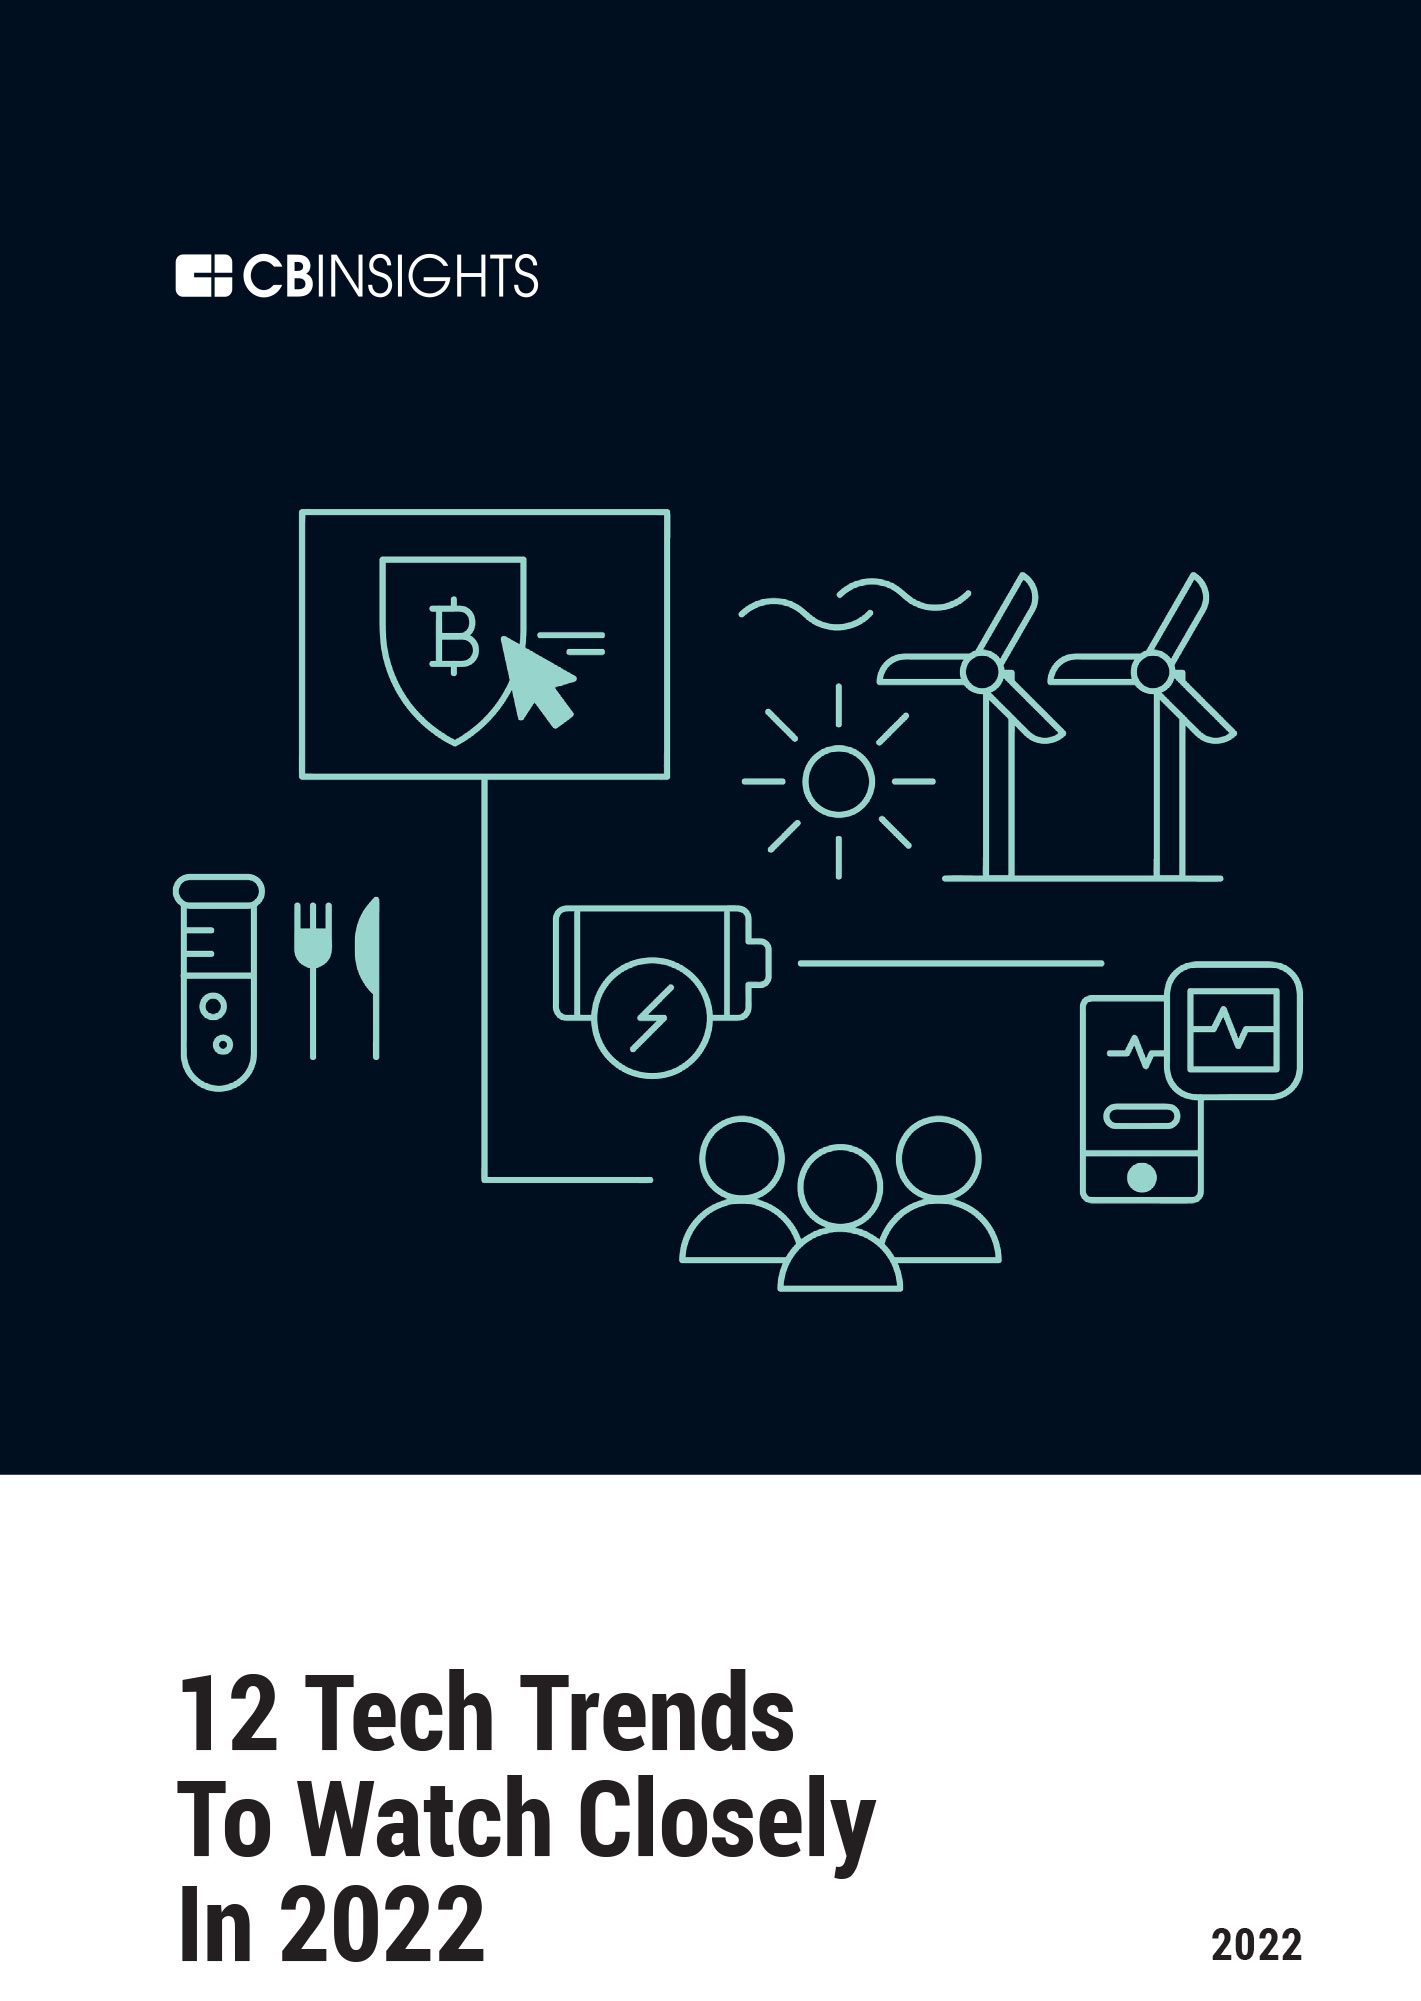 12 Tech trends to watch closely in 2022